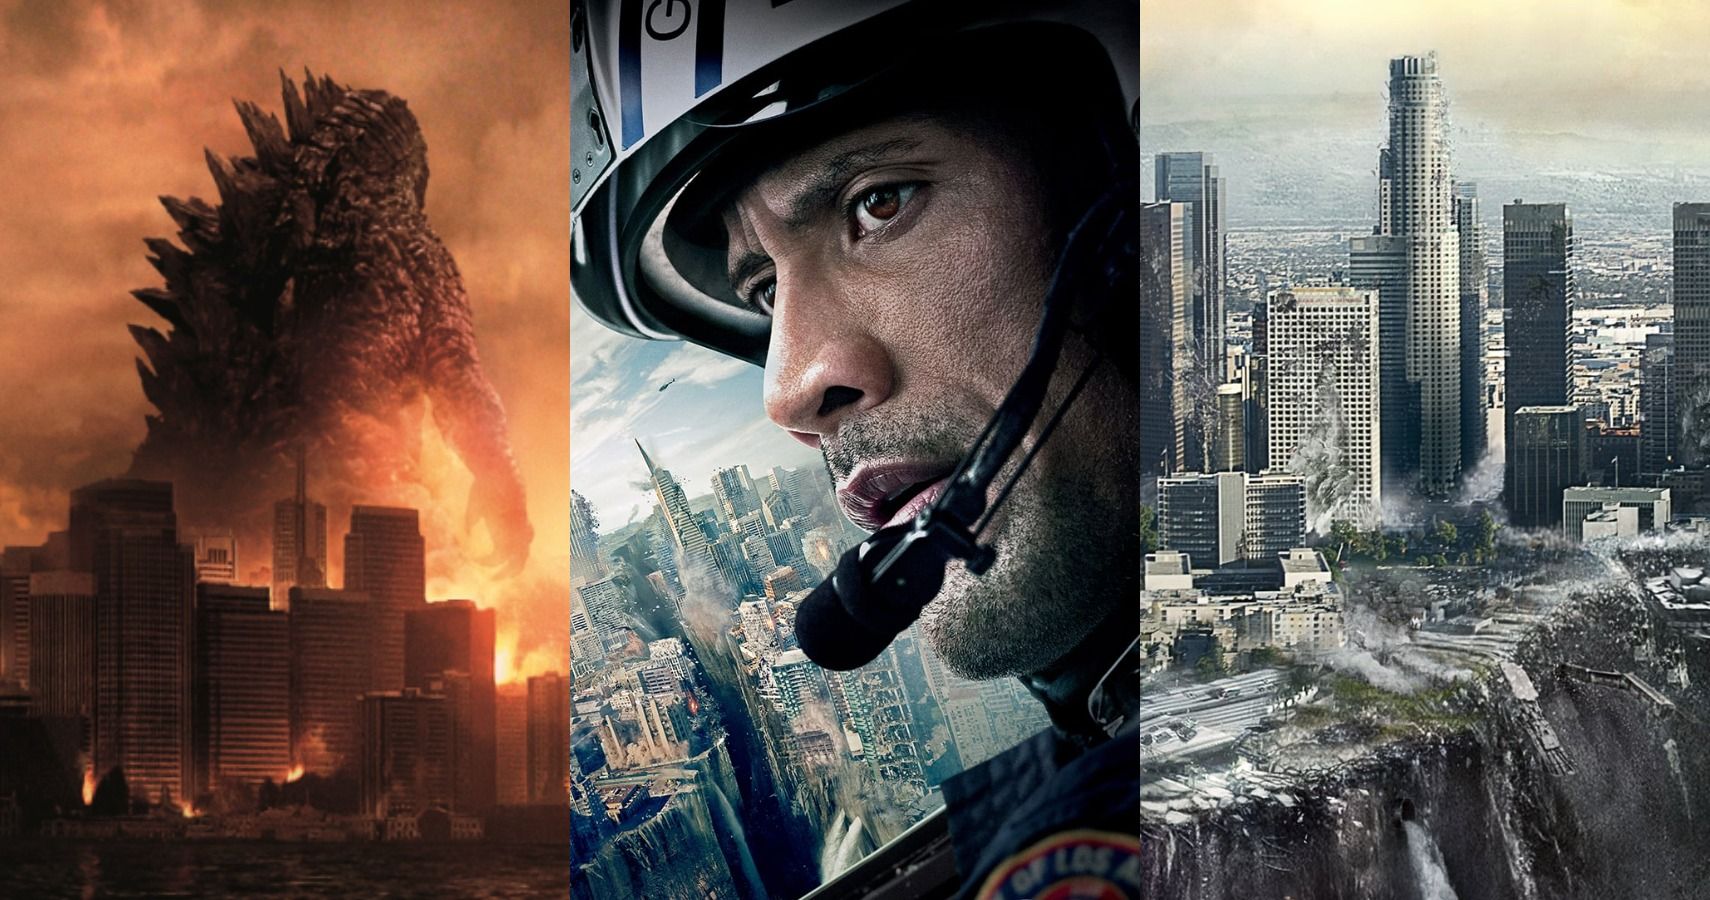 A collage featuring the posters of 2014's Godzilla, San Andreas and 2012